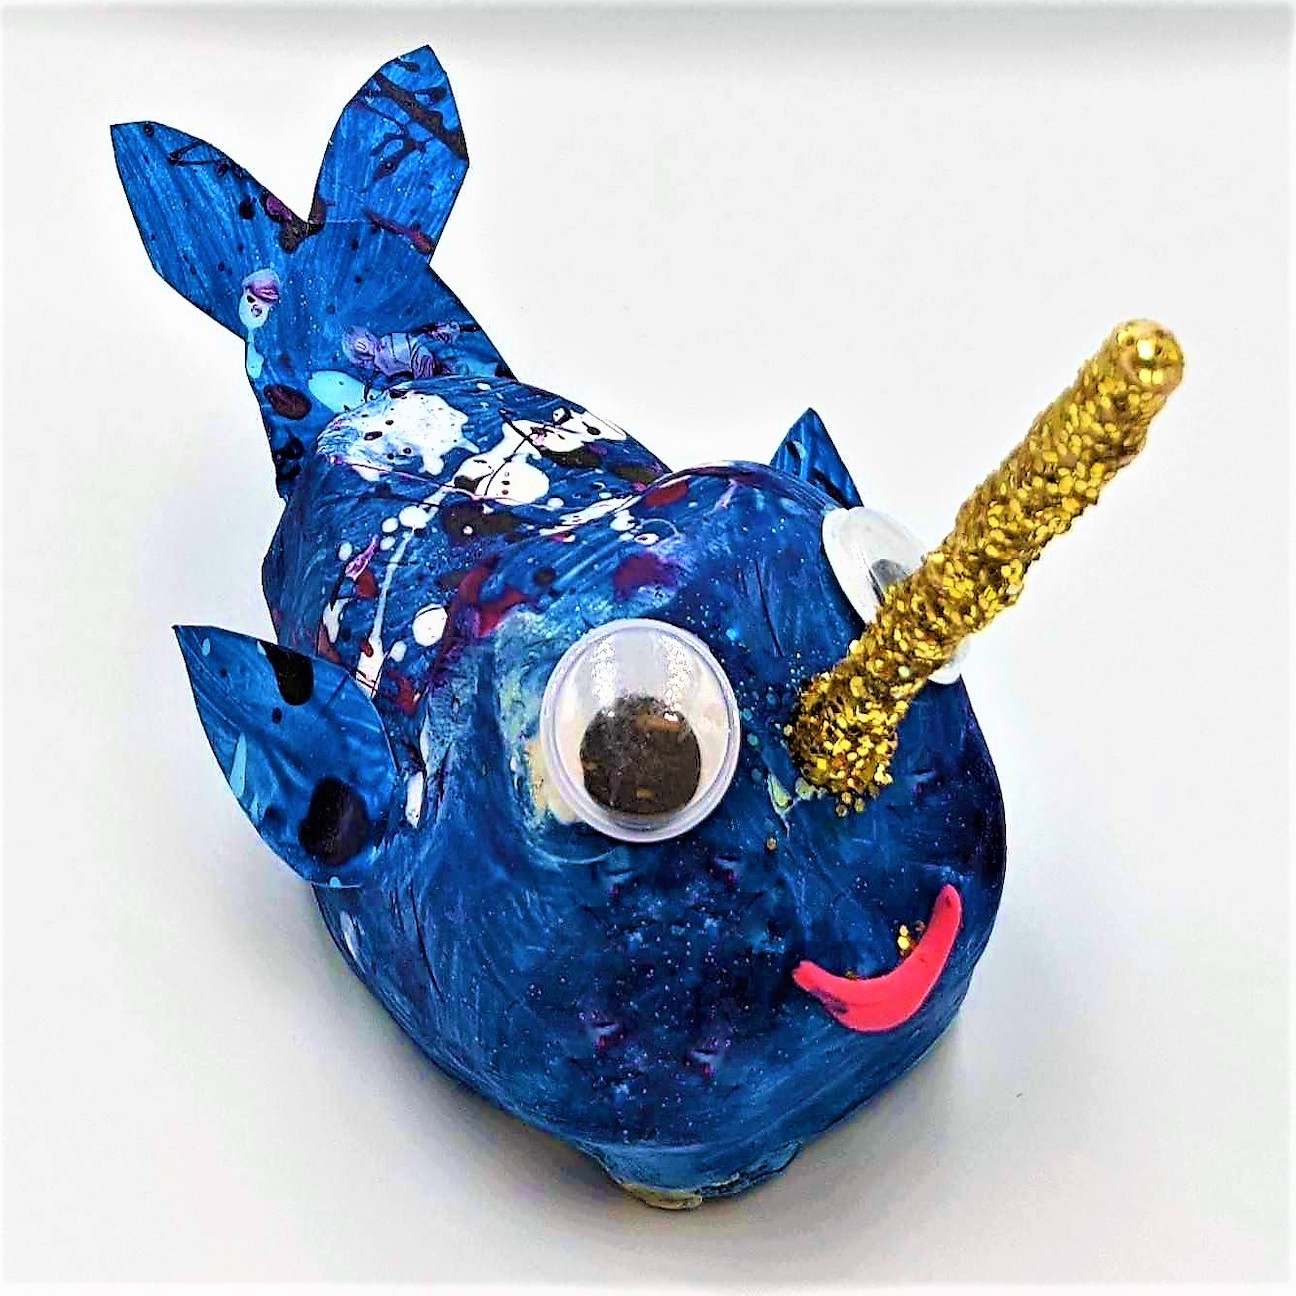 Kidcreate Studio - Mansfield, Nifty Narwhal Art Project